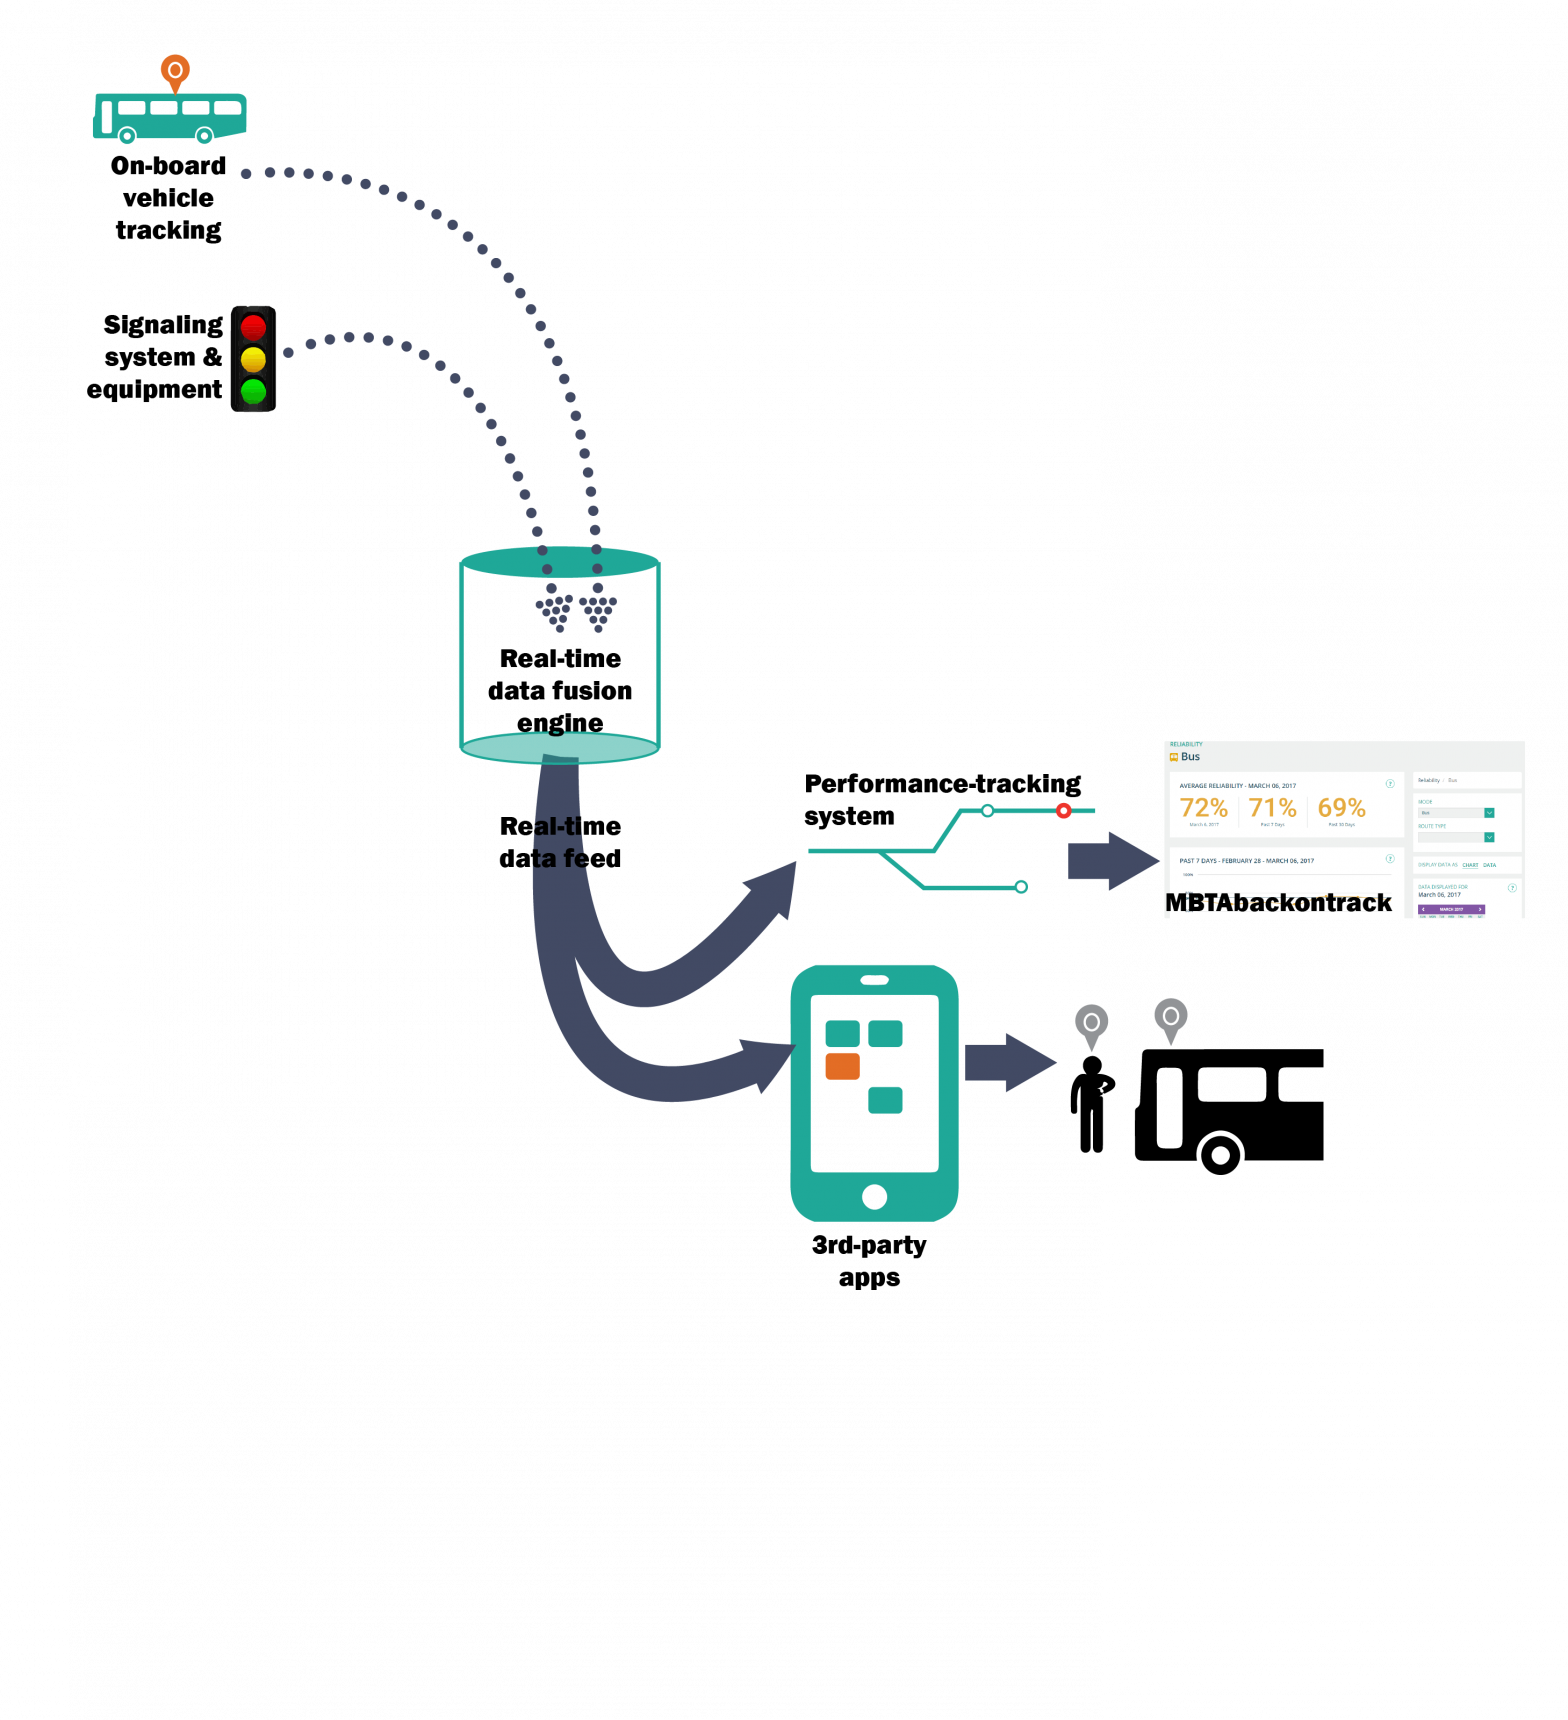 Diagram showing the flow of data to the app feed and the performance dashboard